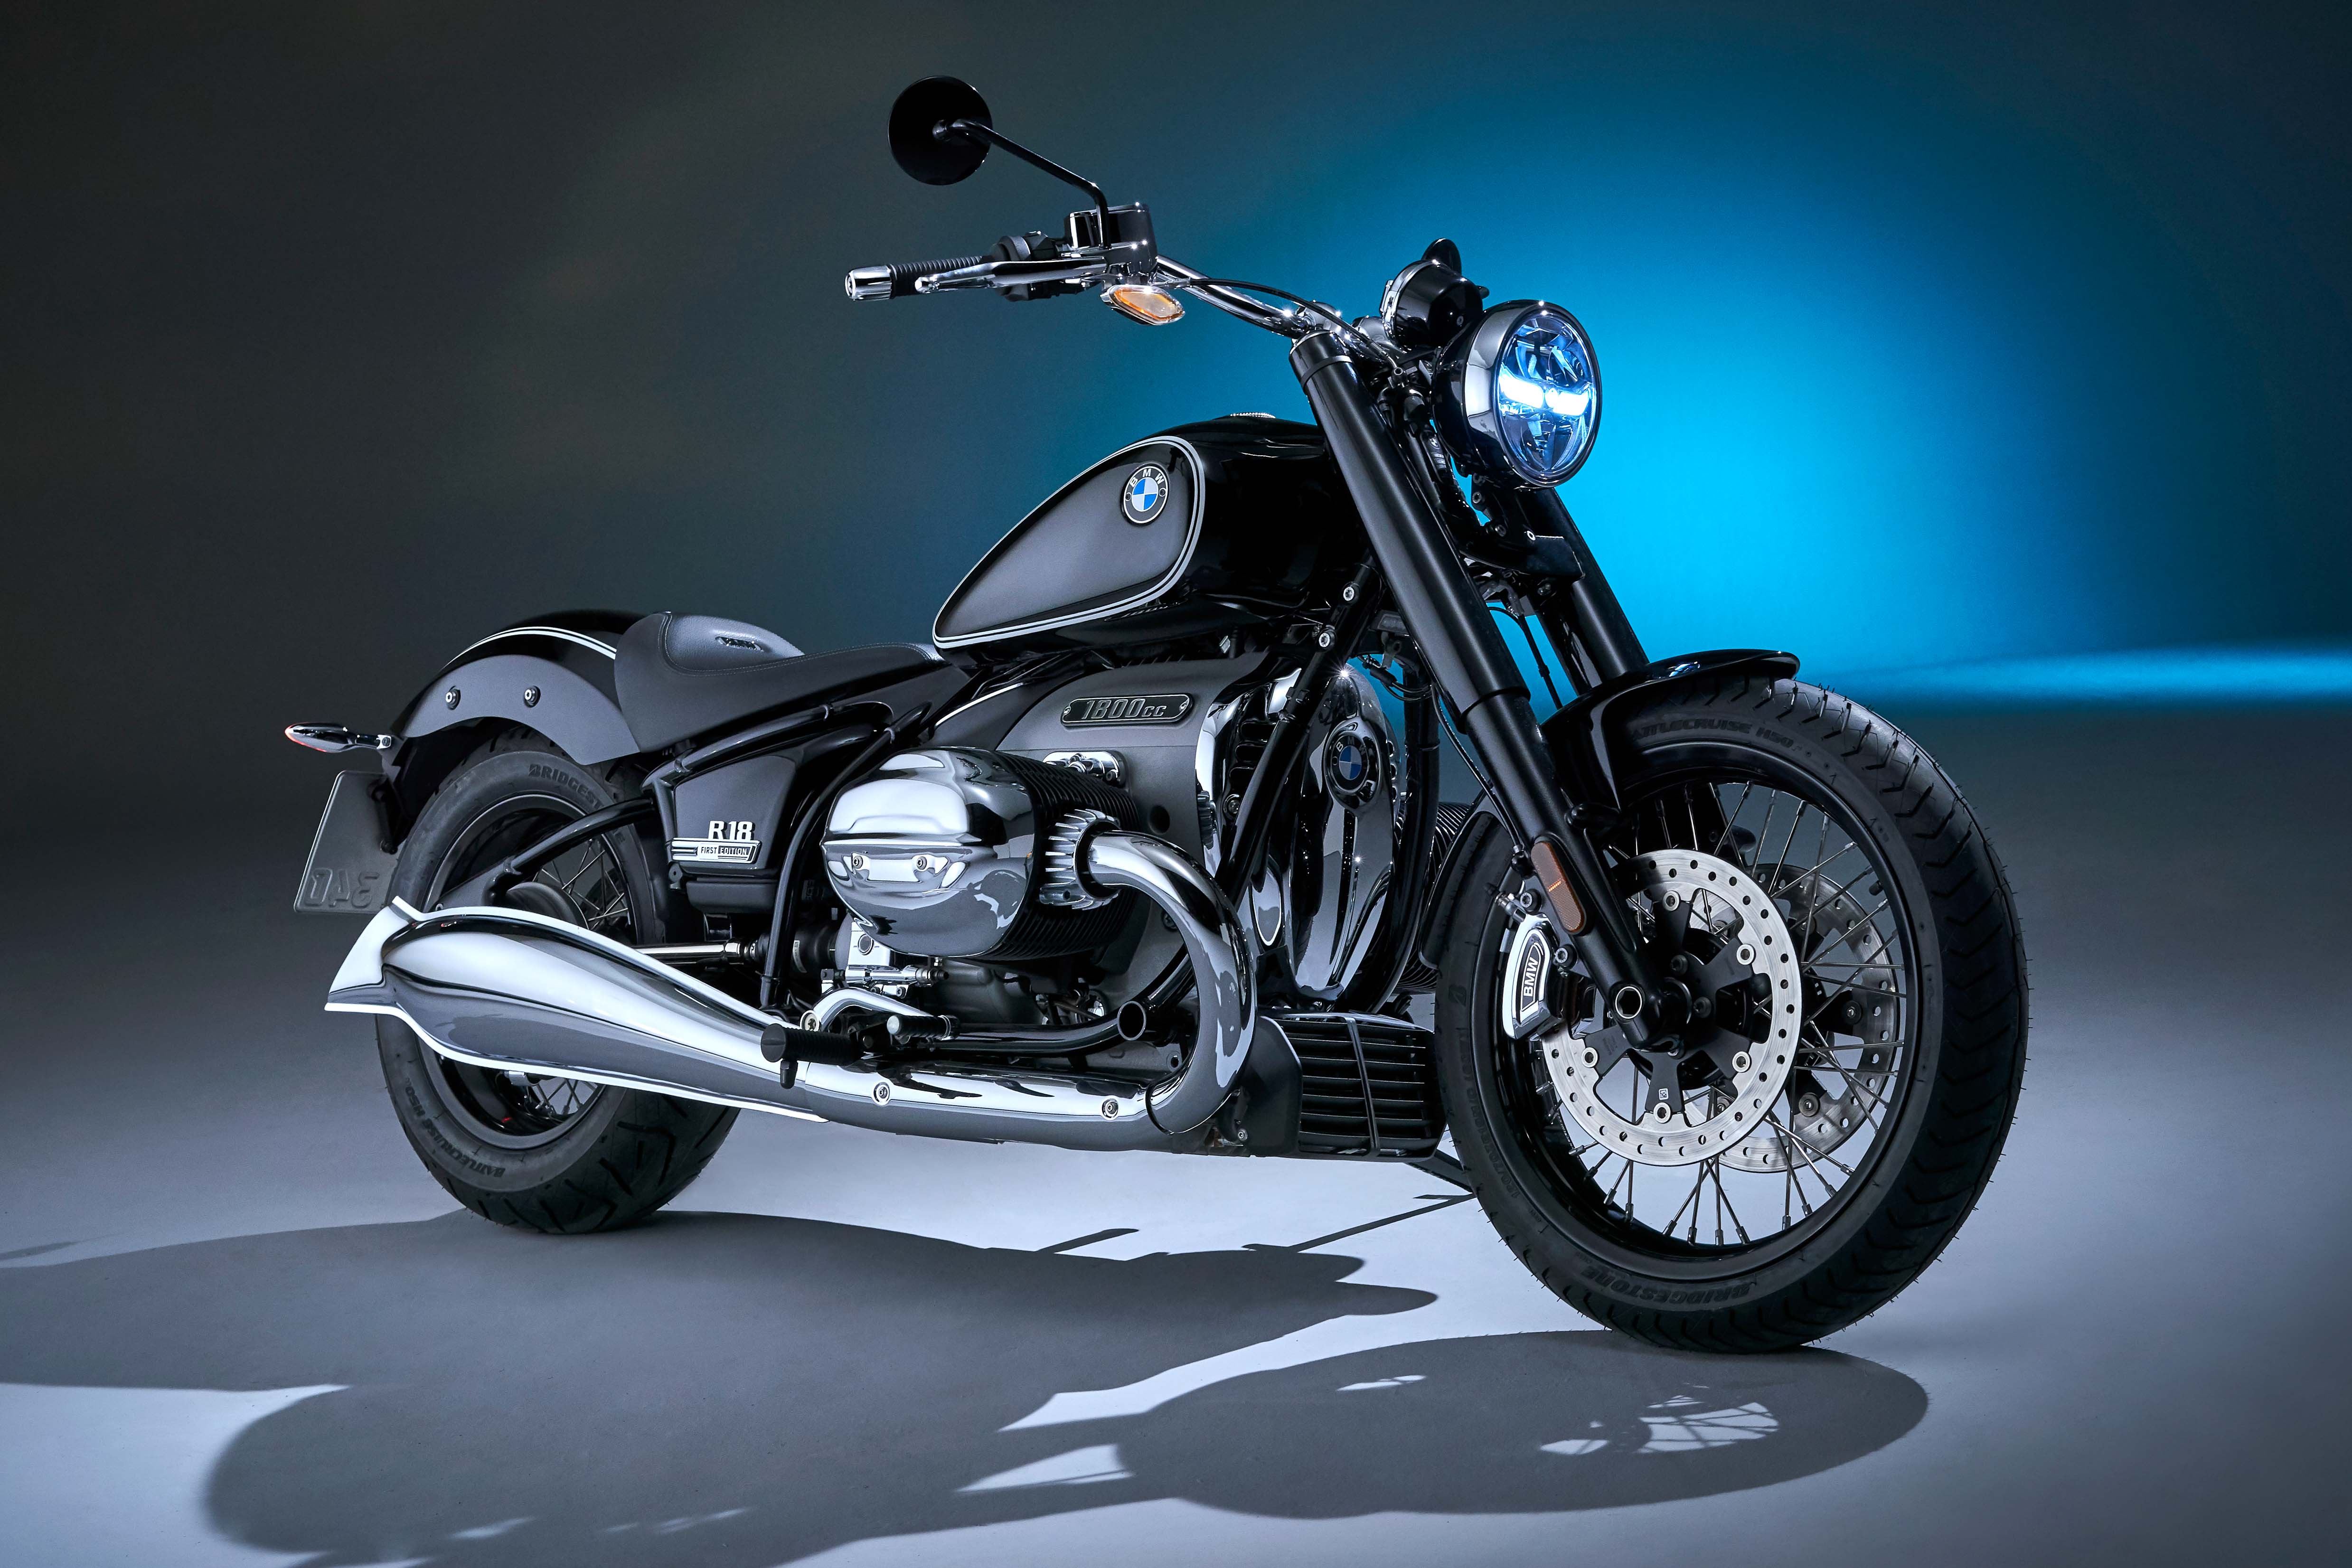 The new BMW R 18 cruiser is finally unveiled! Motorcycle news